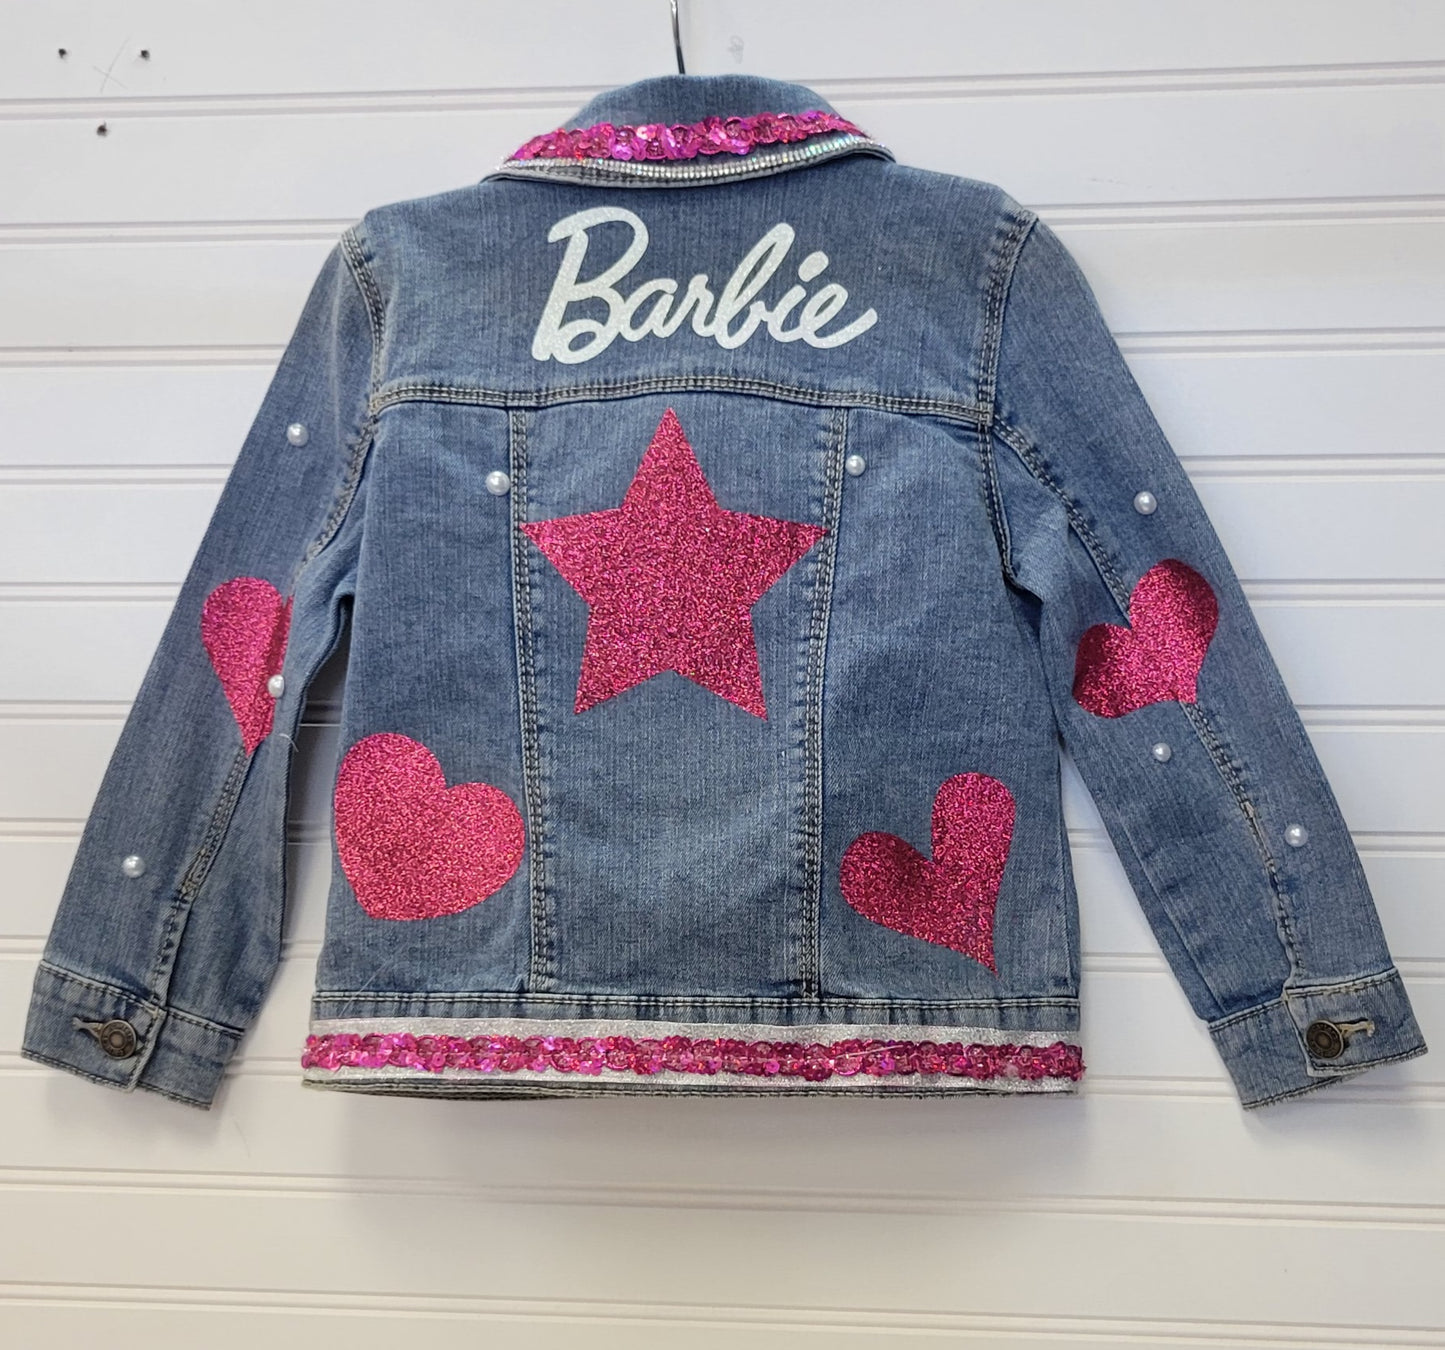 Barbie Outfit, jacket,headpiece and dress.